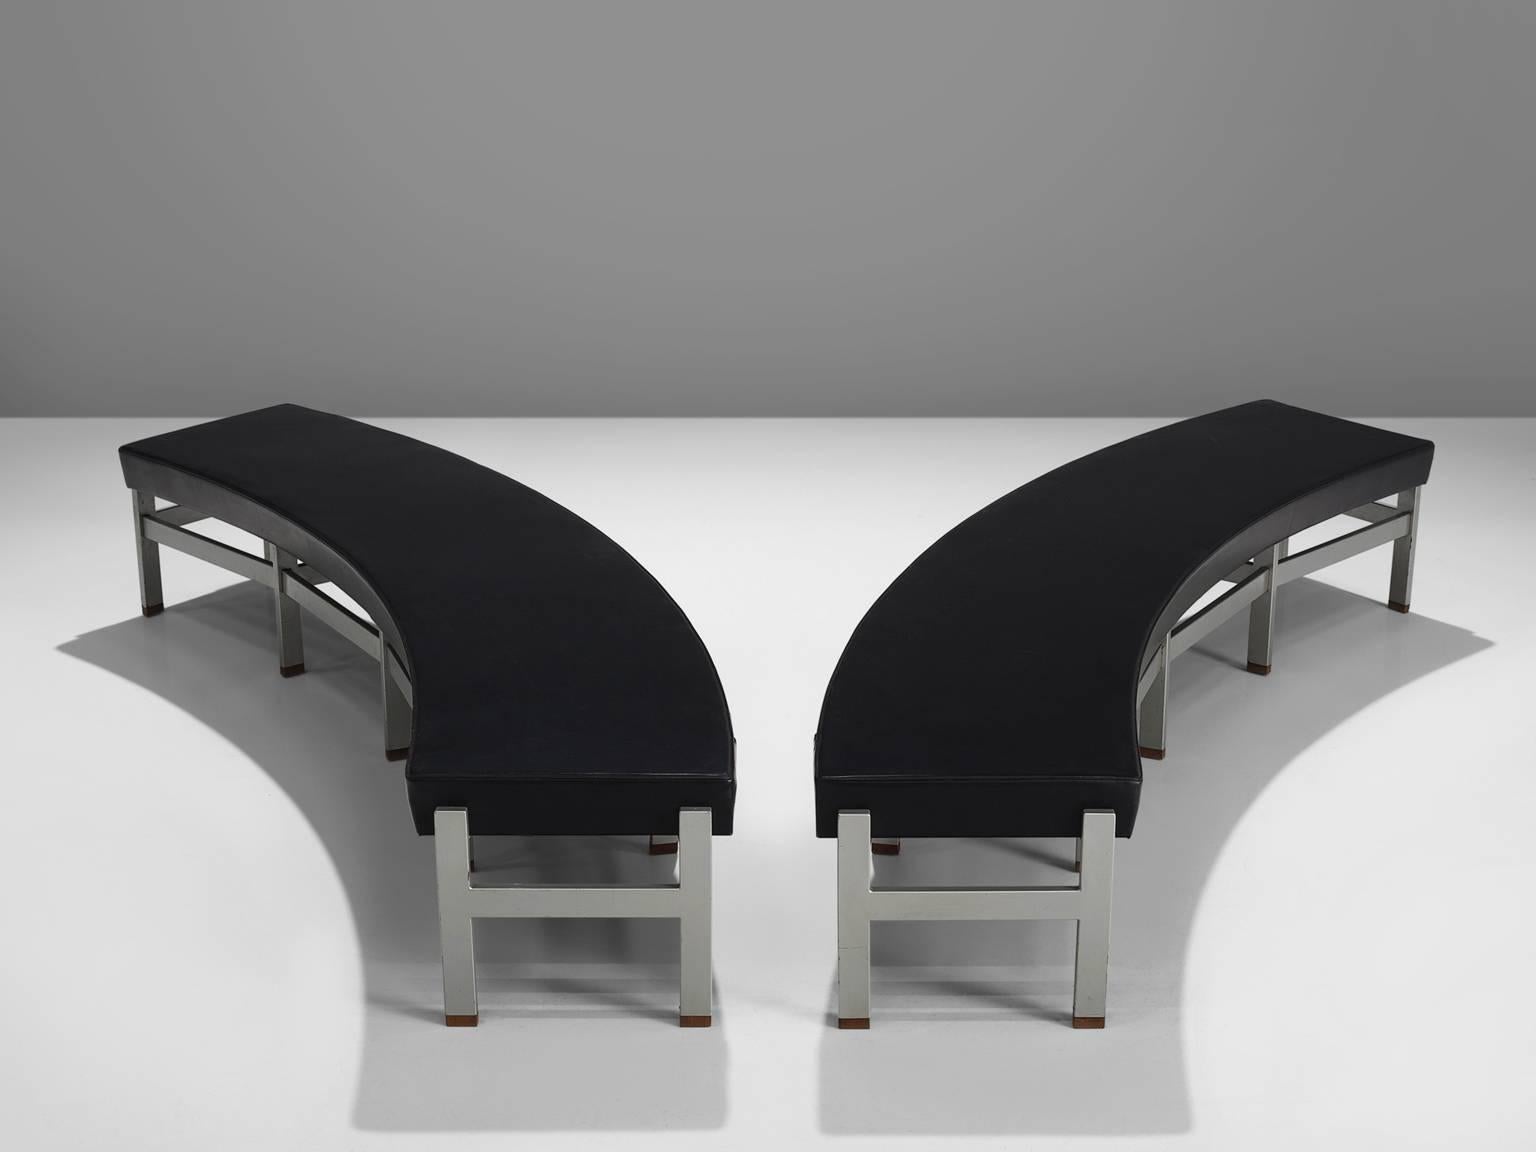 European Set of Three Curved Black Leatherette Benches